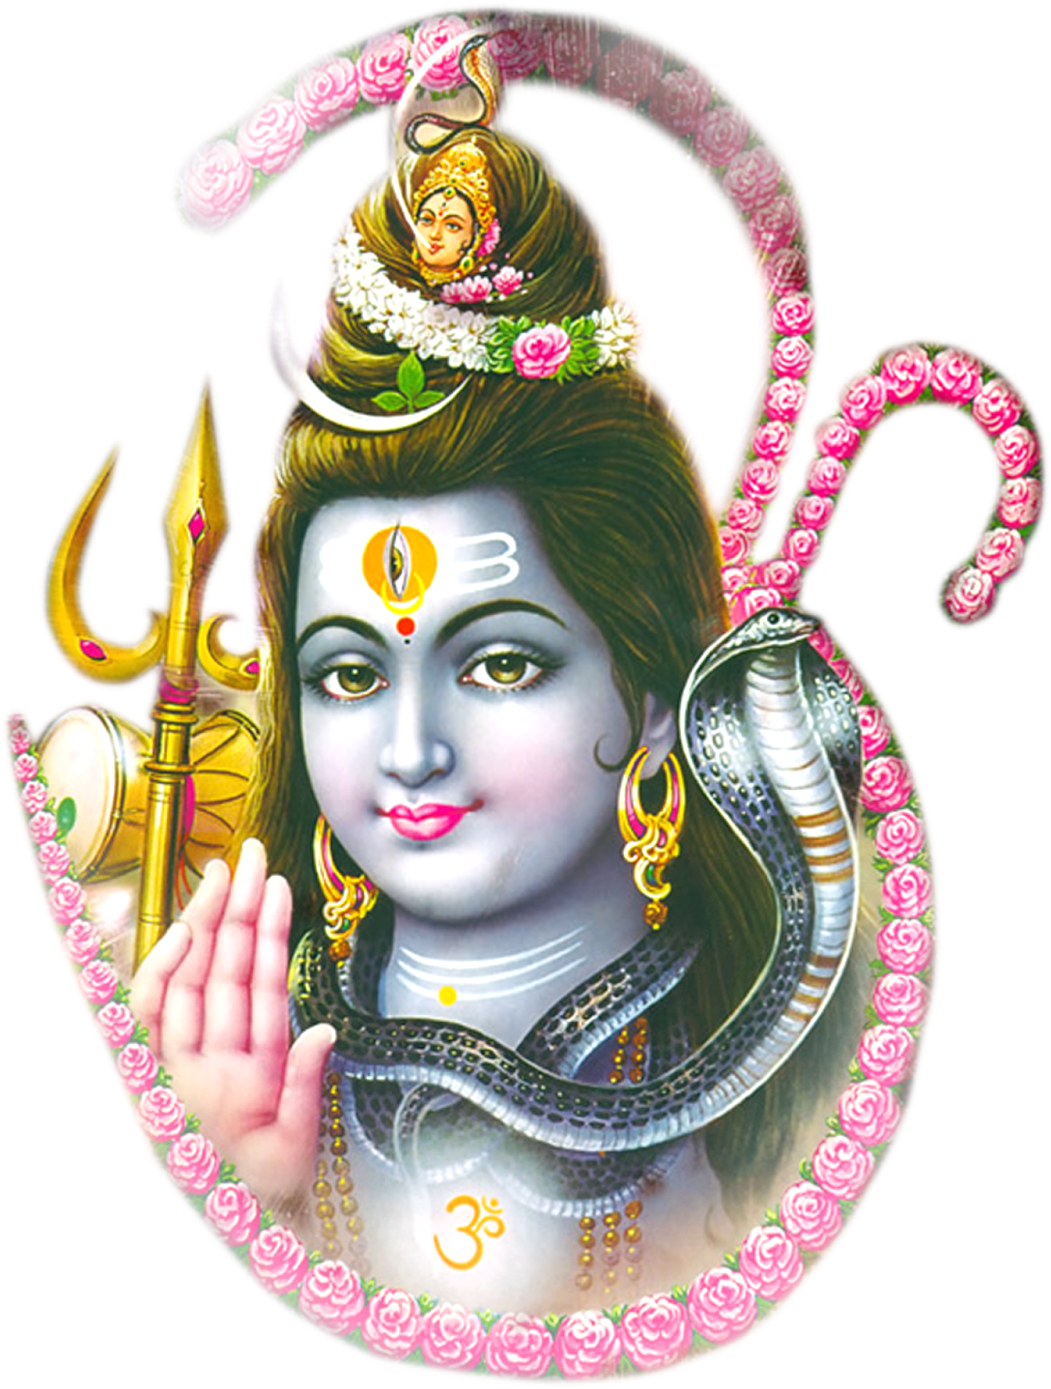 Download Pngforall - Lord Hindu God Hd PNG Image with No ...